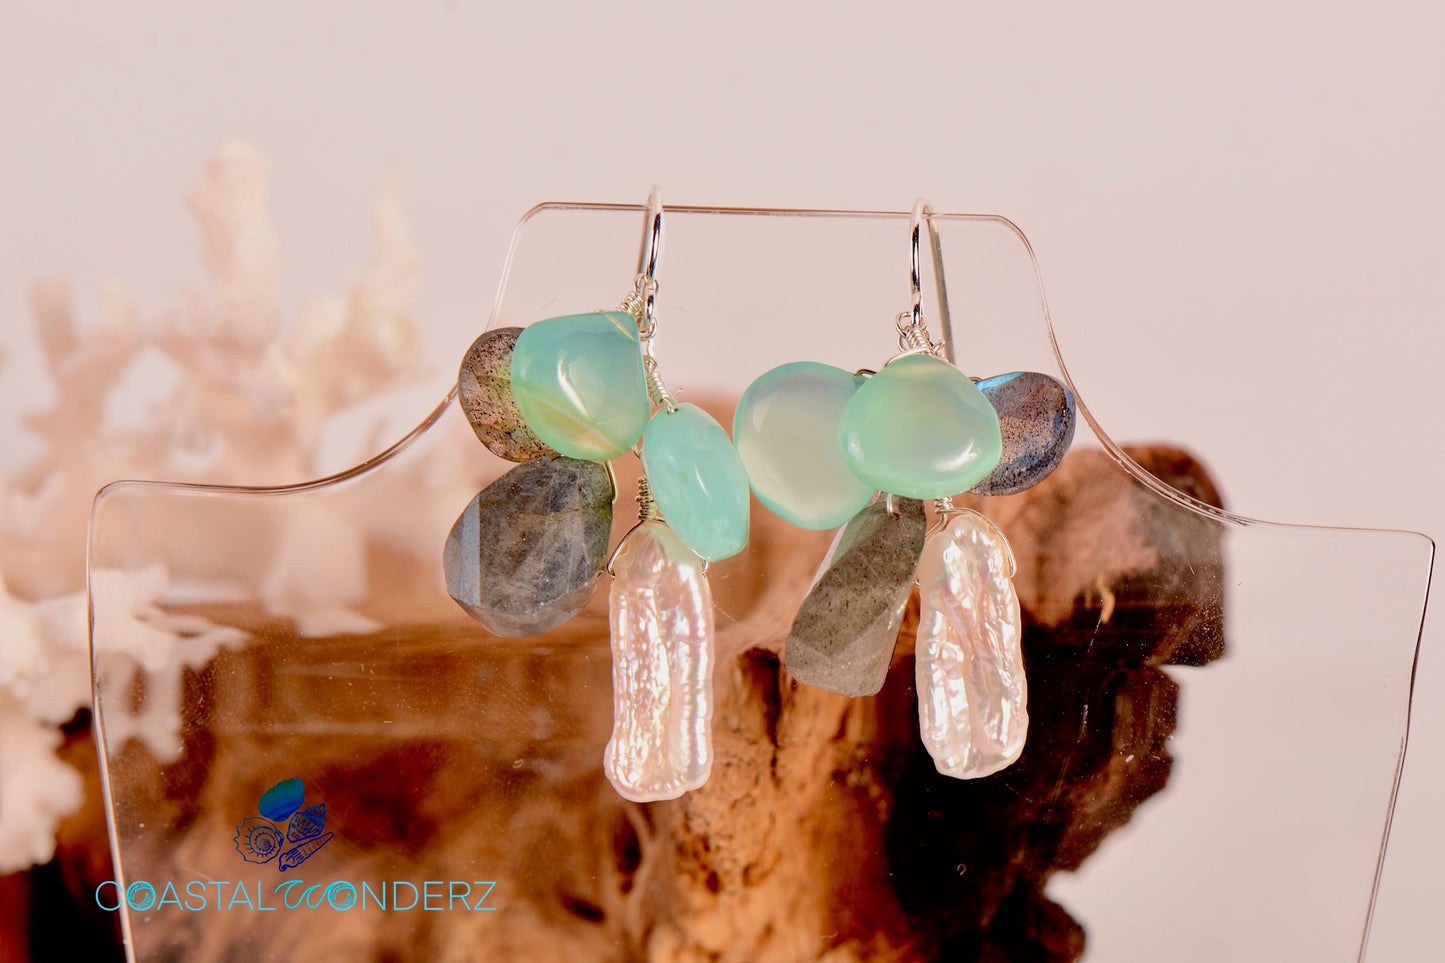 "Playa" Earrings with Chalcedony and Labradorite